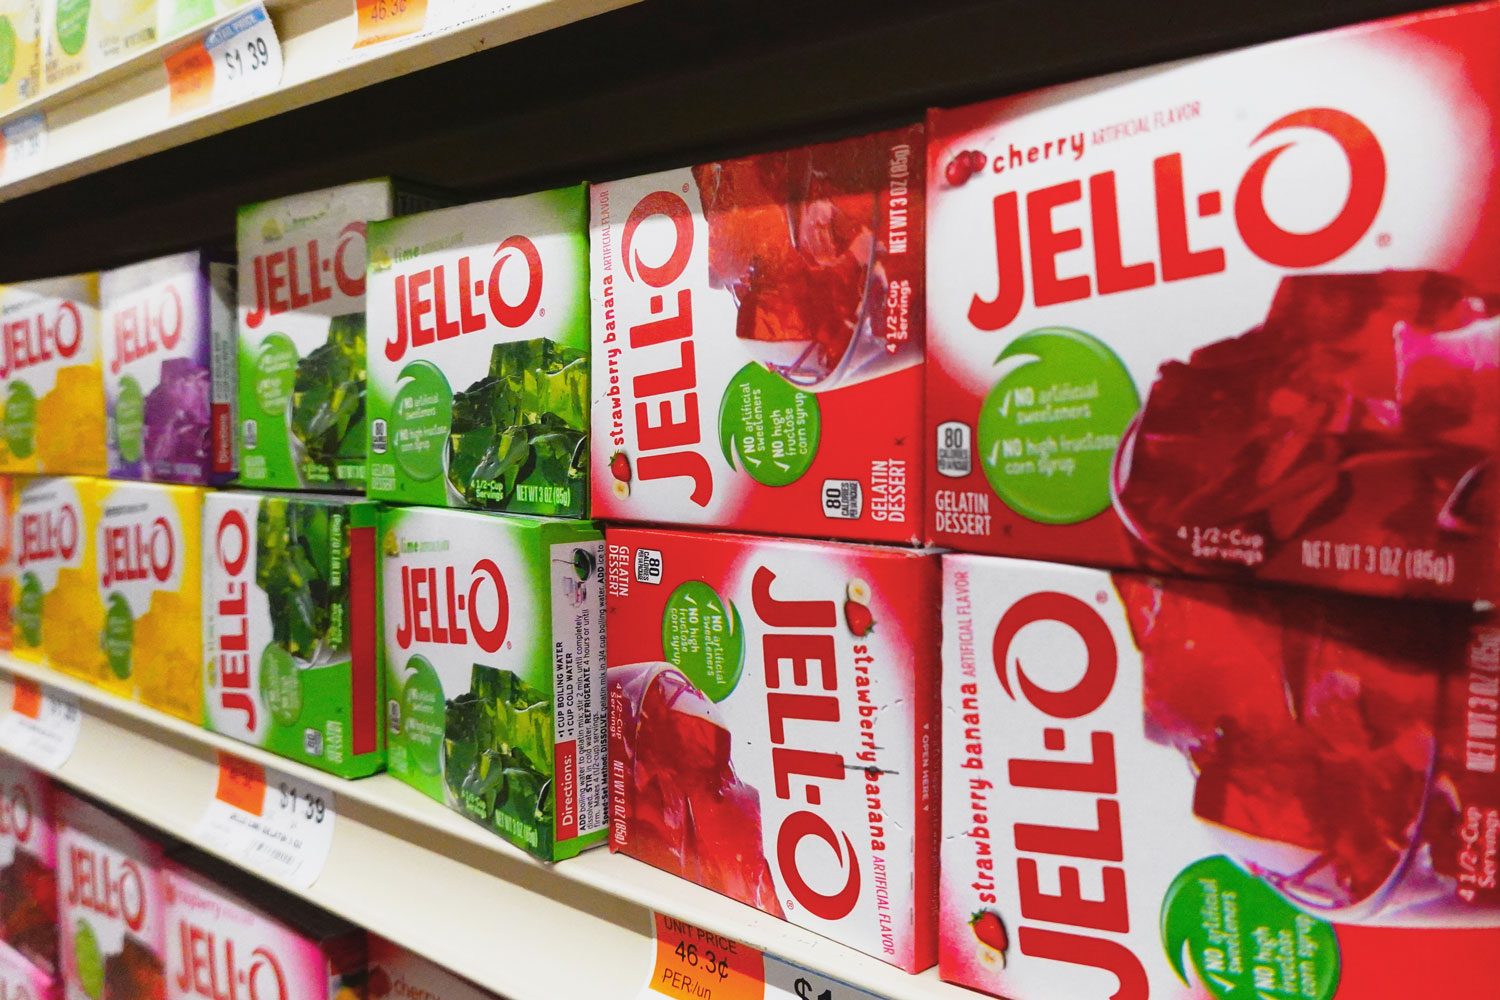 Jell-O Boxes are on Display at Ideal Food Basket Grocery Store in Brooklyn borough in New York City